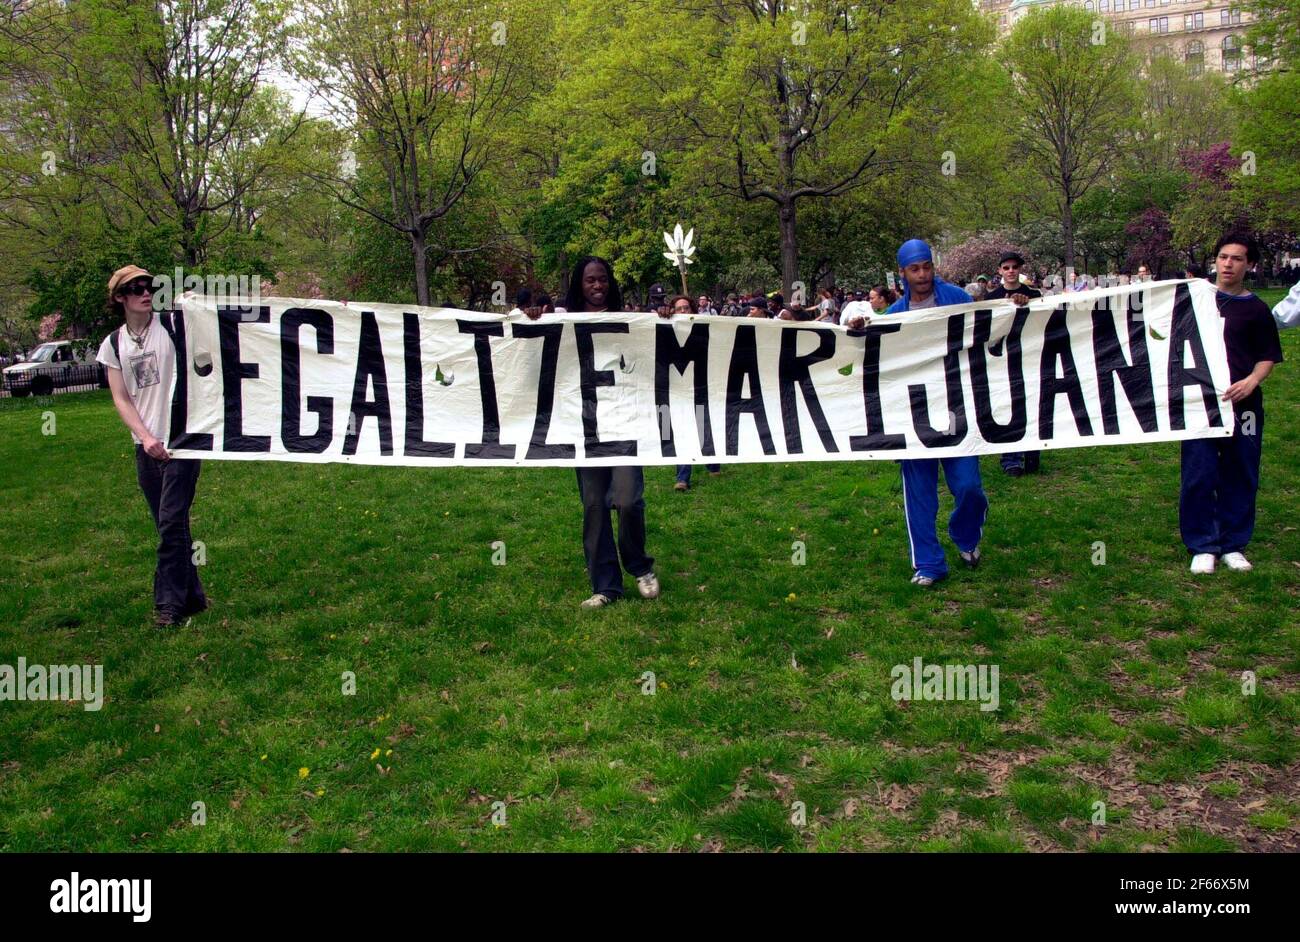 New York City, USA. 01st May, 2004. Advocates for the legalization of marijuana march and rally on May 1, 2004. The annual protest had approx. 1000 participants, mostly younger people but also some old-time hippies. Some of the groups participating in the parade called for the use of marijuana and ibogaine for medical treatment, others want it legalized for recreational use. (Photo by Richard B. Levine) Credit: Sipa USA/Alamy Live News Stock Photo